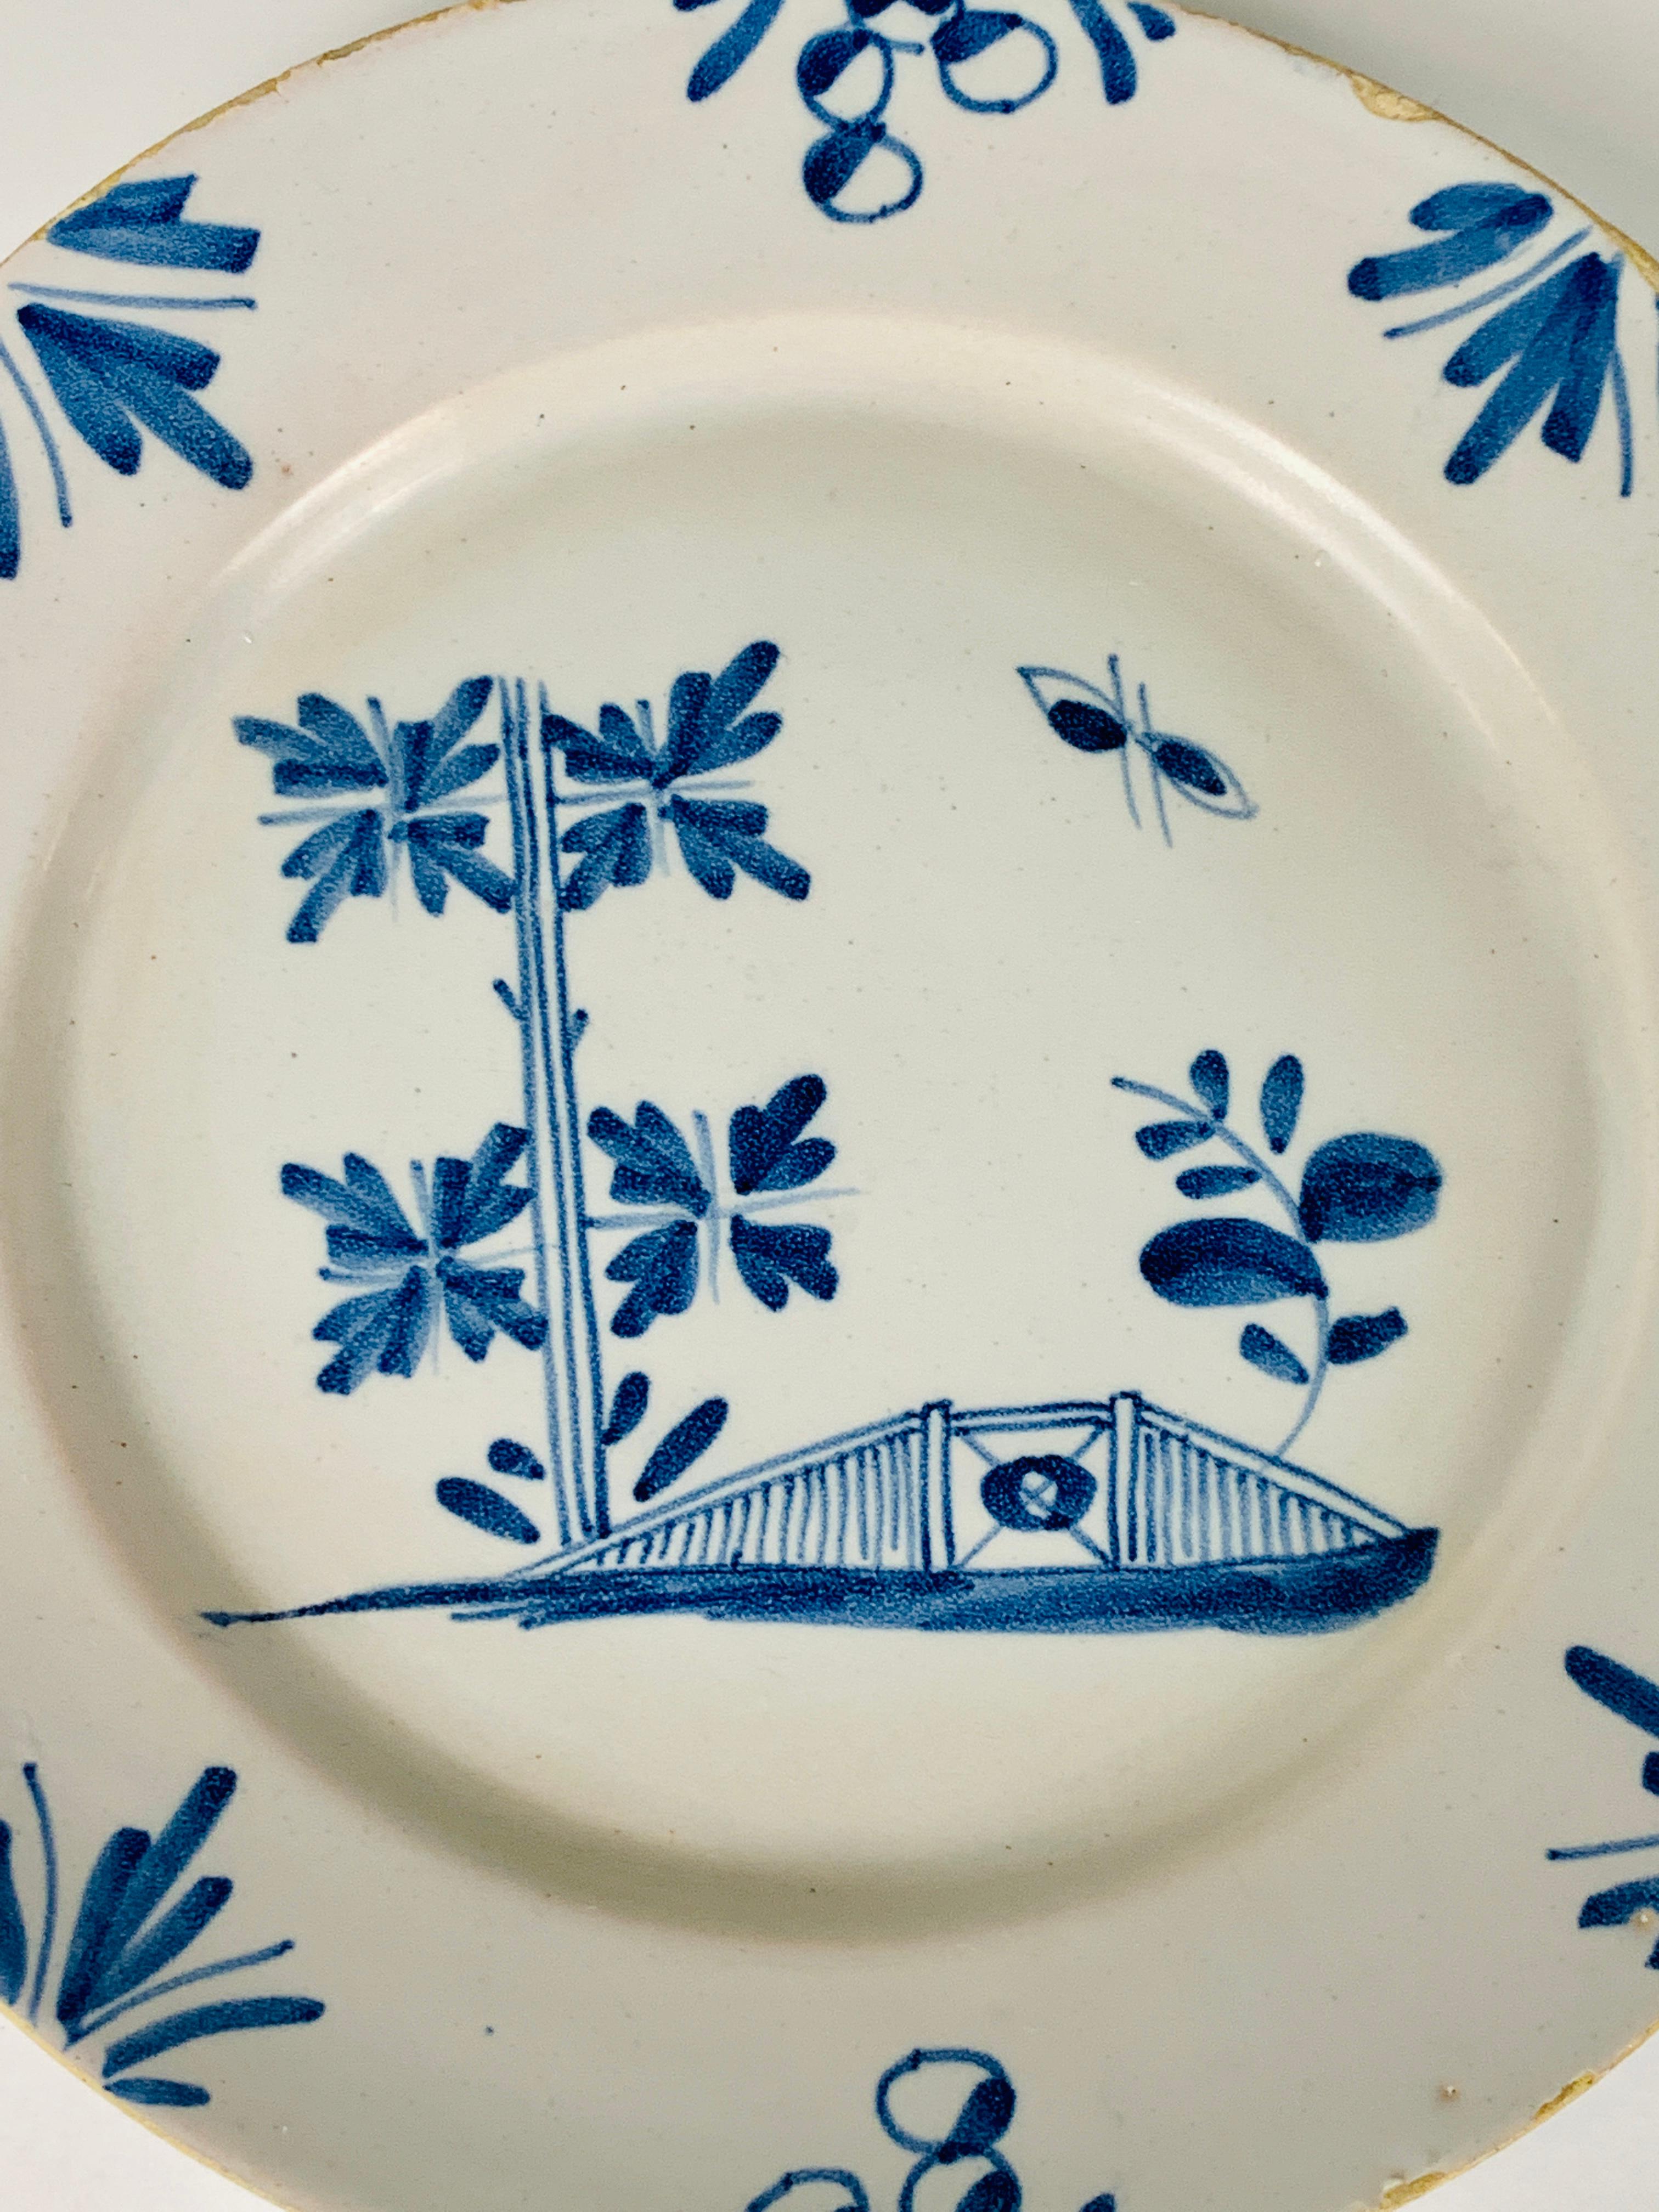 A small blue and white English Delft plate made circa 1740. 
The hand-painted decoration is naive, showing a garden fence, a leafy tree, and a butterfly. On the border are leaves and flowers.
The tin glaze is applied thinly, showing the underlying